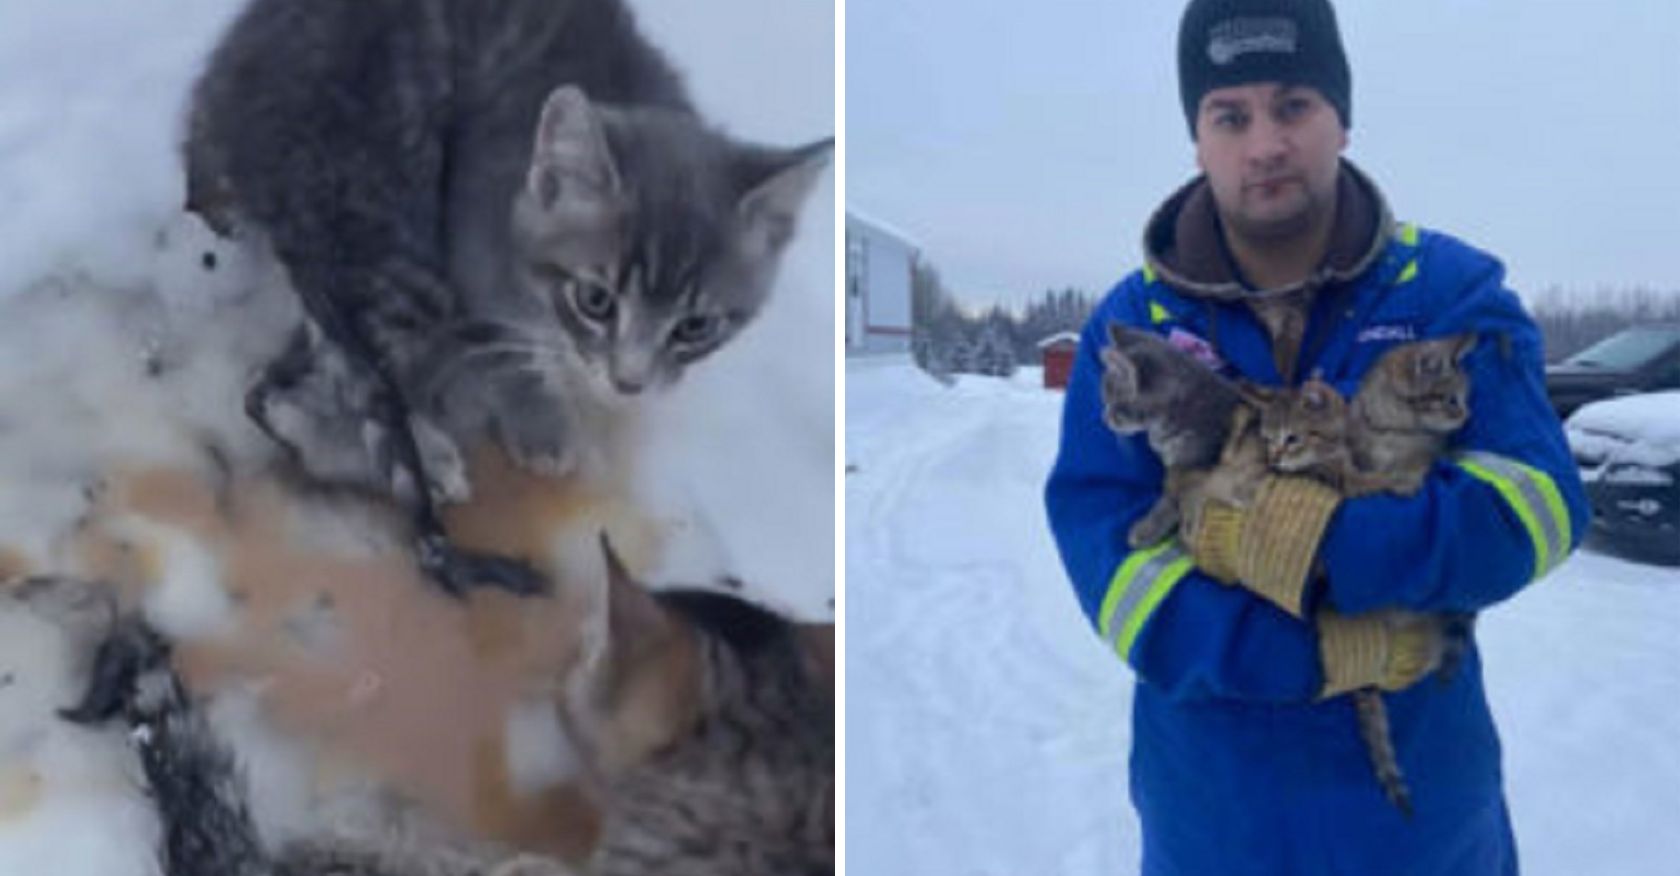 With a Cup of Warm Coffee, a Kind-Hearted Man Rescues Three Frozen Kittens!